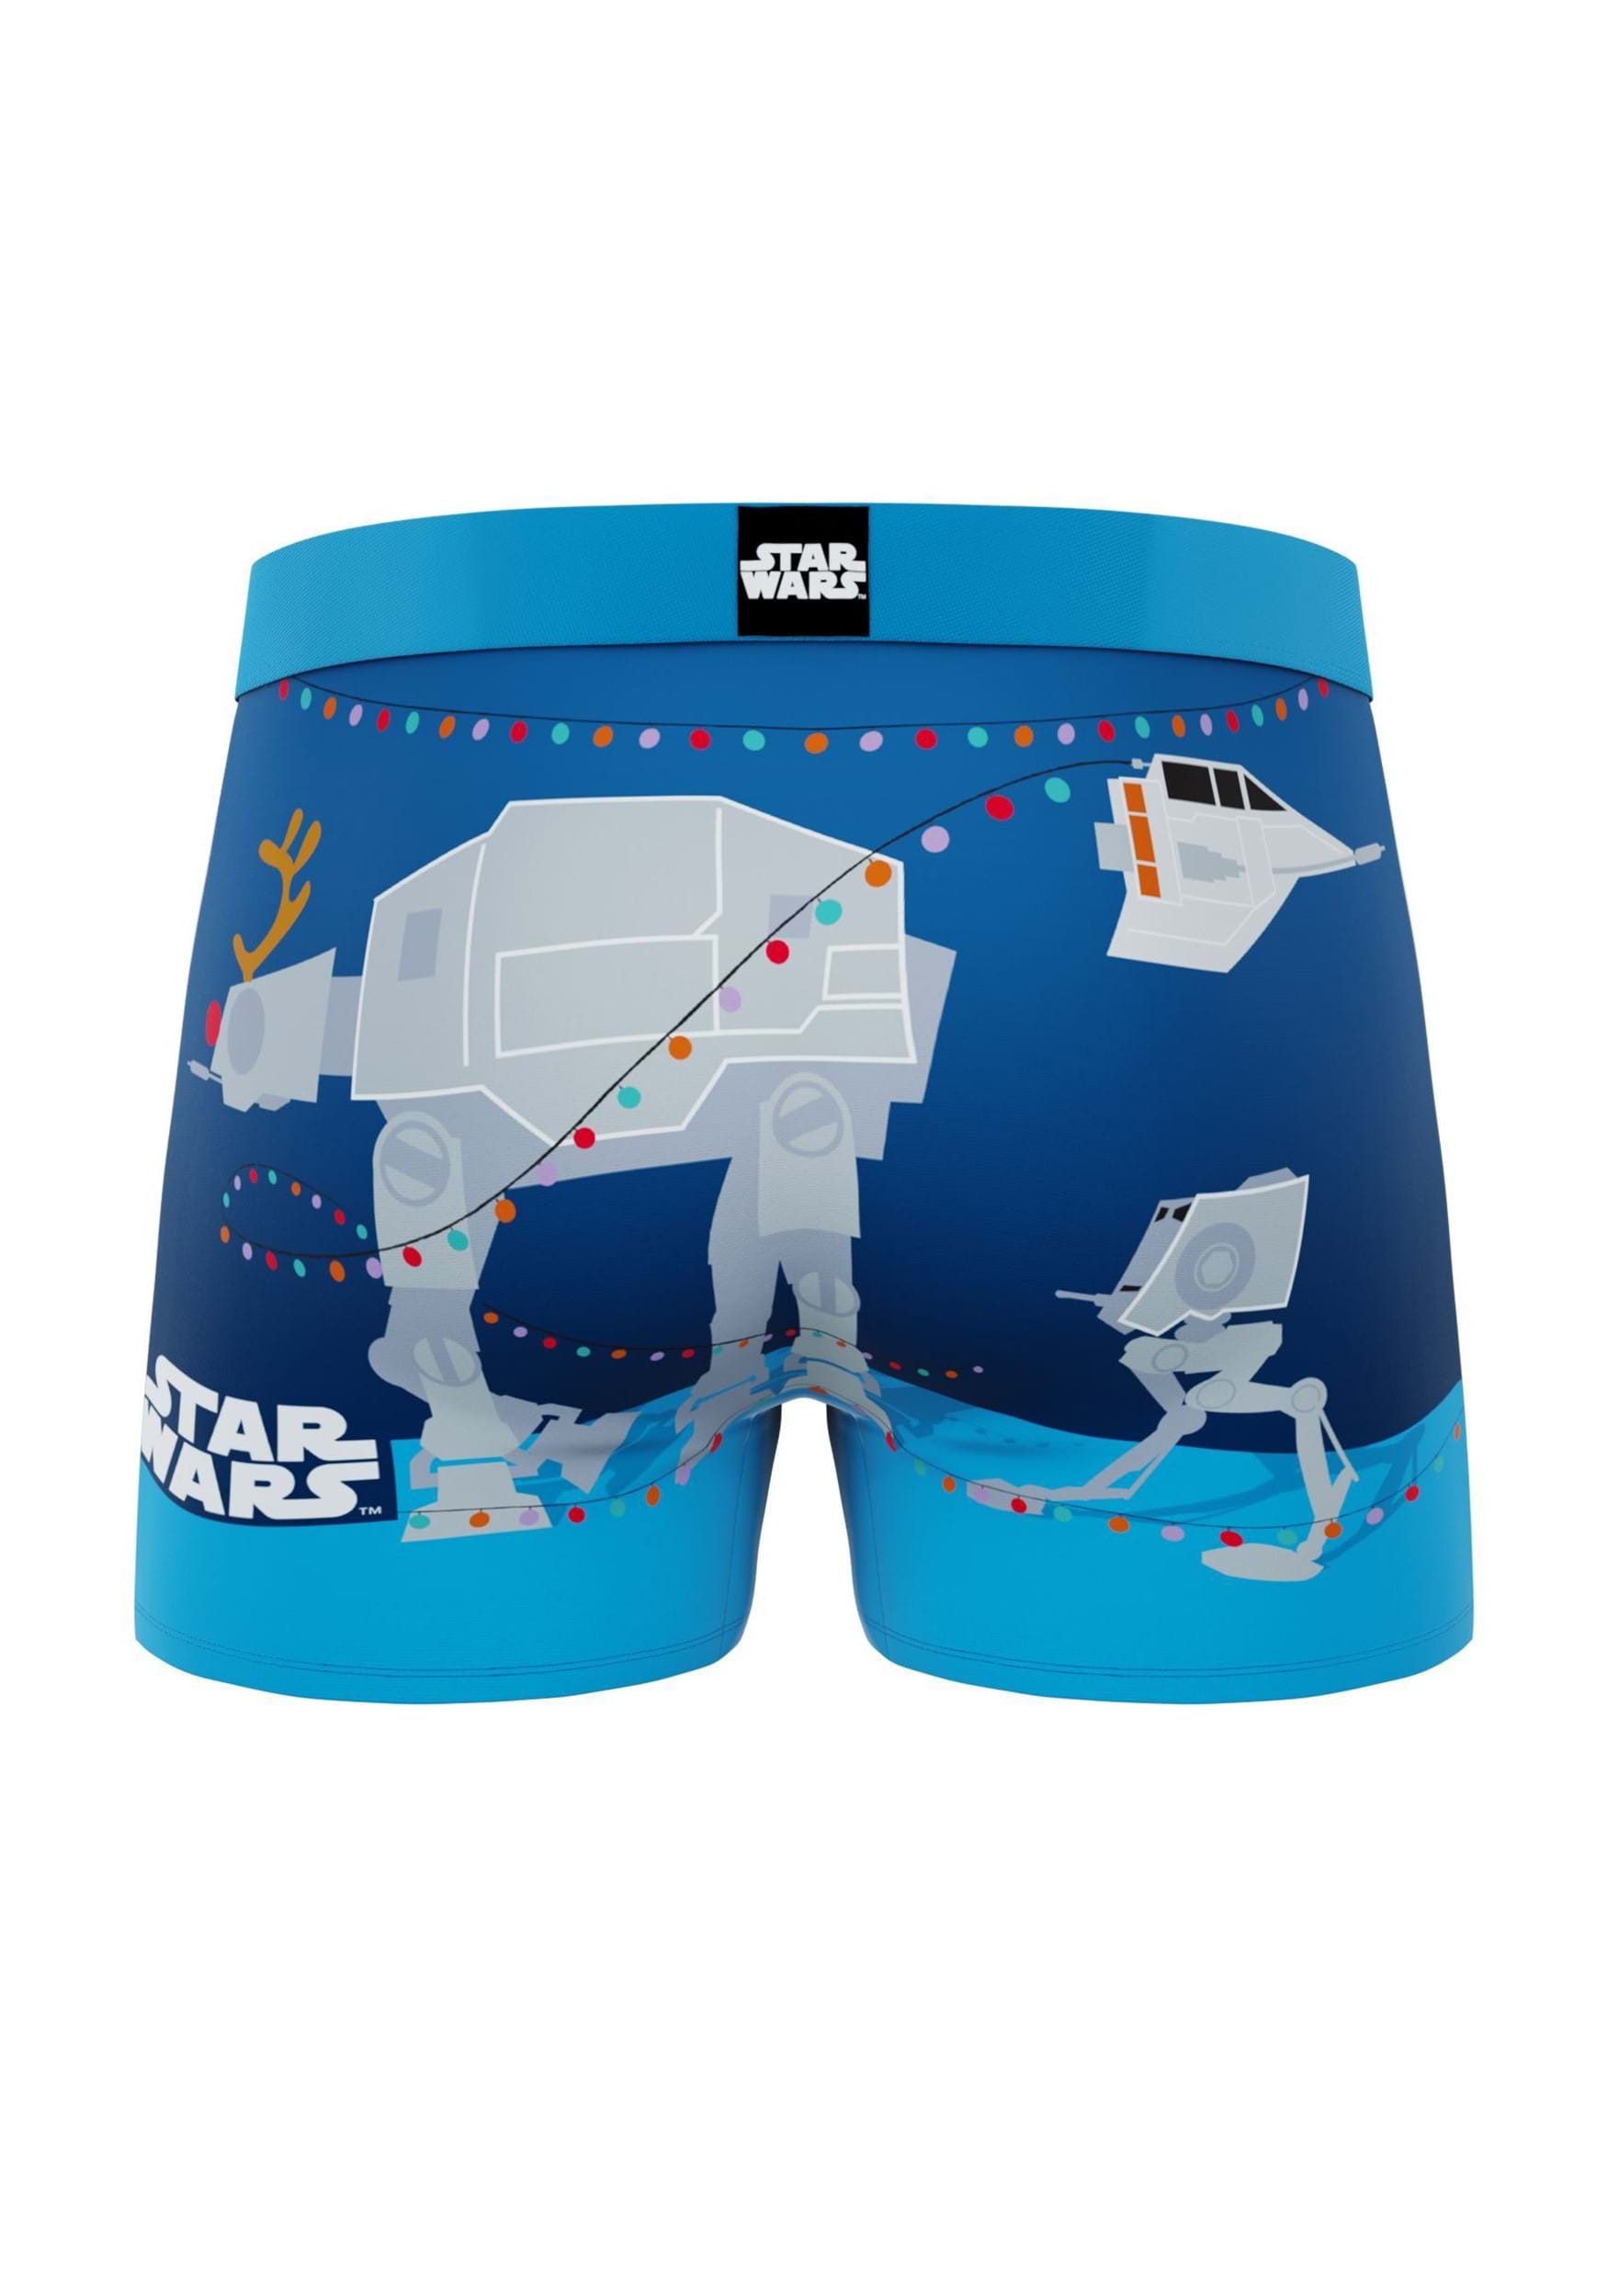 https://images.fun.com/products/79262/2-1-203624/mens-star-wars-christmas-at-at-boxer-briefs-alt-1.jpg